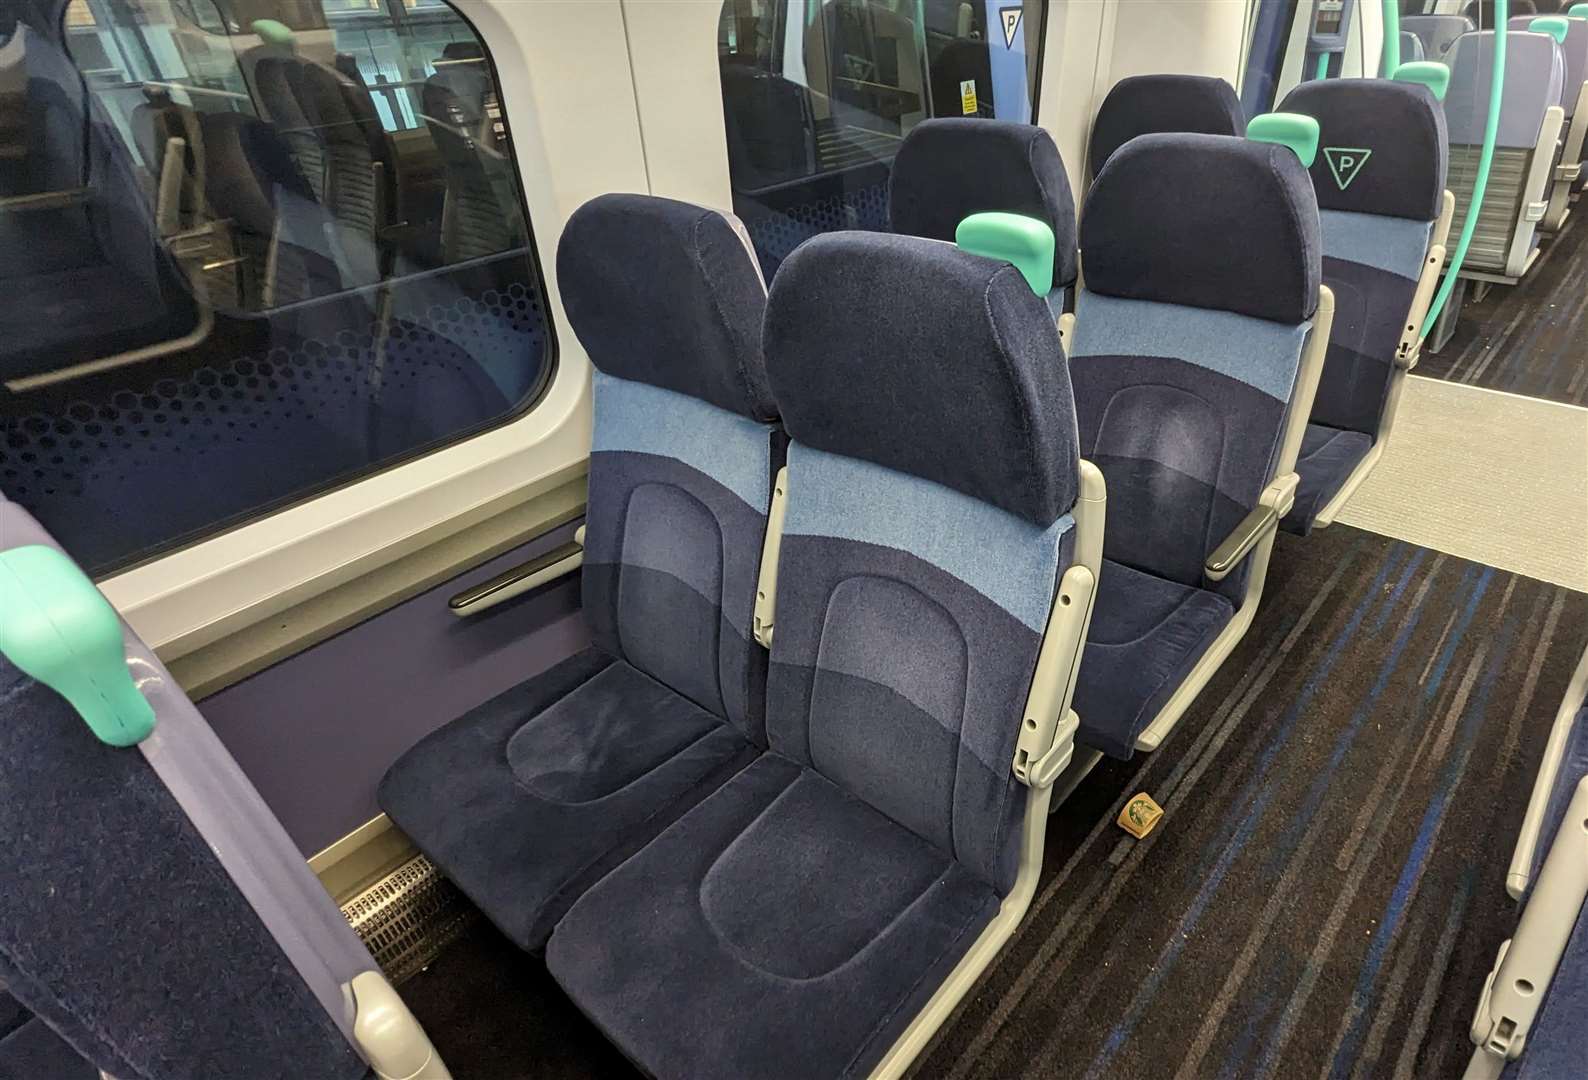 Seats on the high-speed train have been refreshed with new upholstery